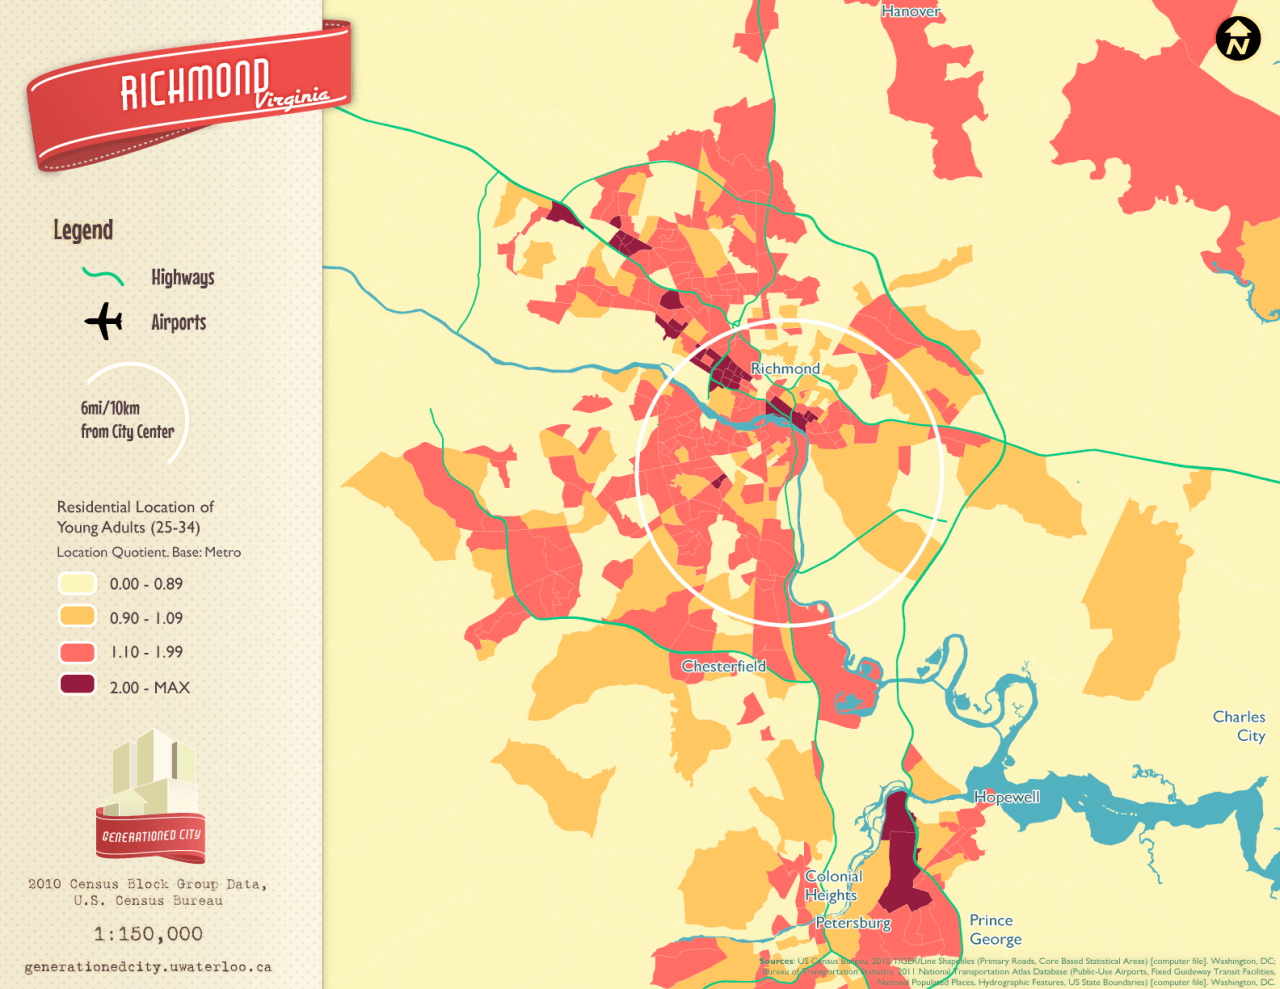 Residential location of young adults in Richmond.